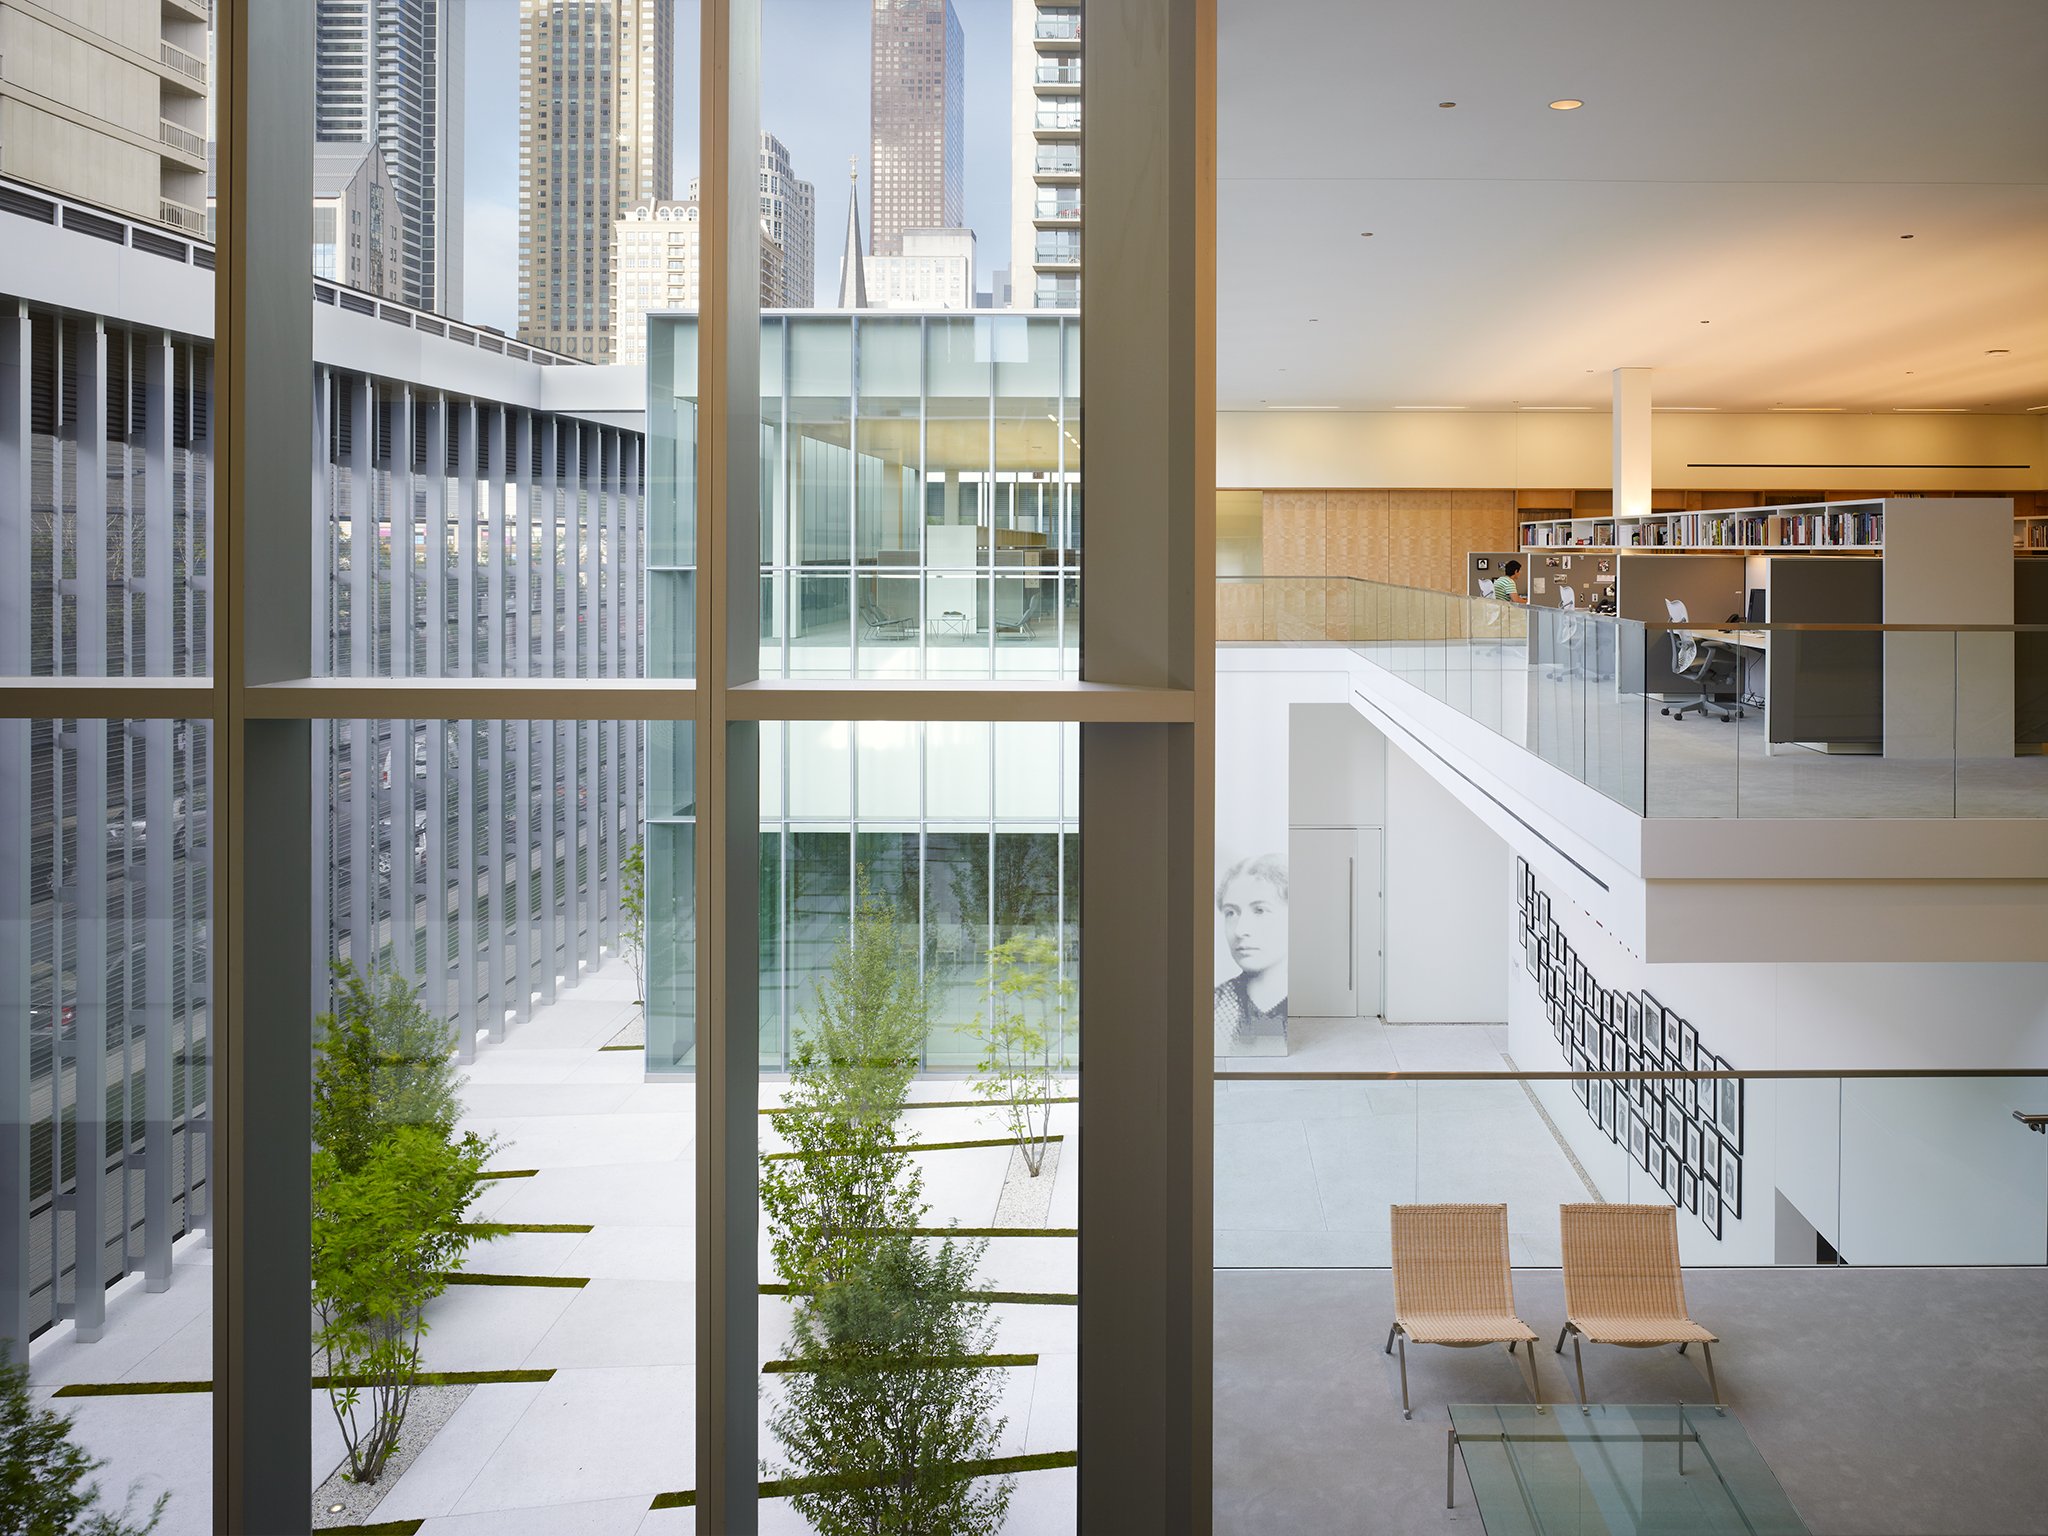  Poetry Foundation  John Ronan Architects  Chicago, IL     View Full Project  